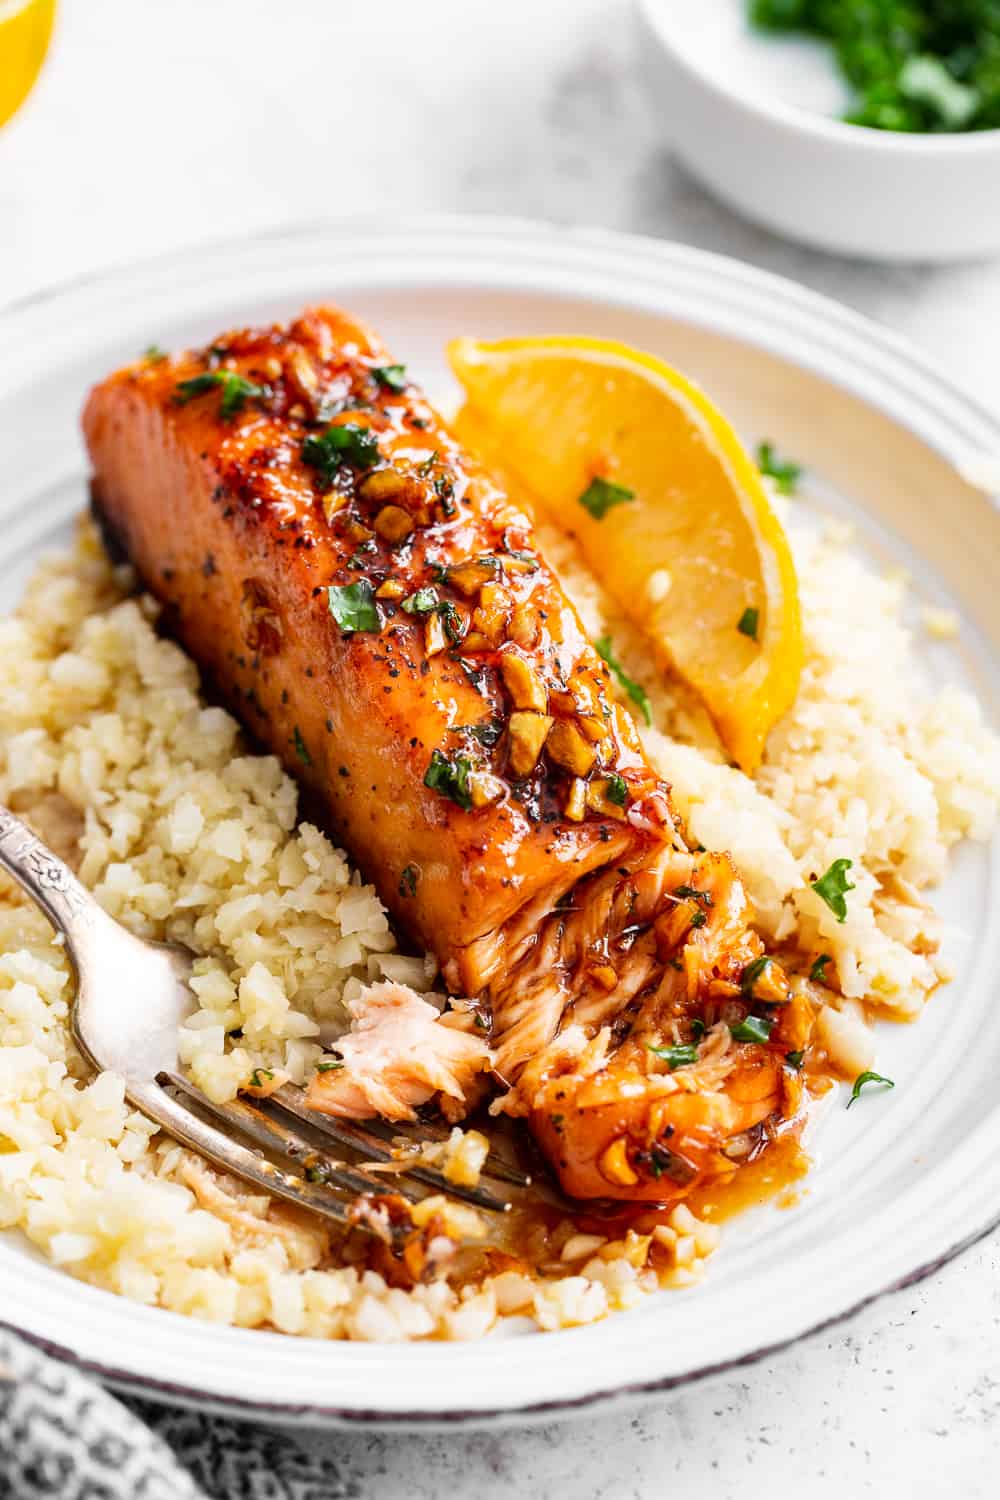 This simple 20 minute honey garlic salmon is made in one skillet and the sauce is addicting!  It’s paleo, gluten free and a family favorite.  Serve it over cauliflower rice and with your favorite veggies for a healthy weeknight meal.  #paleo #cleaneating #salmon